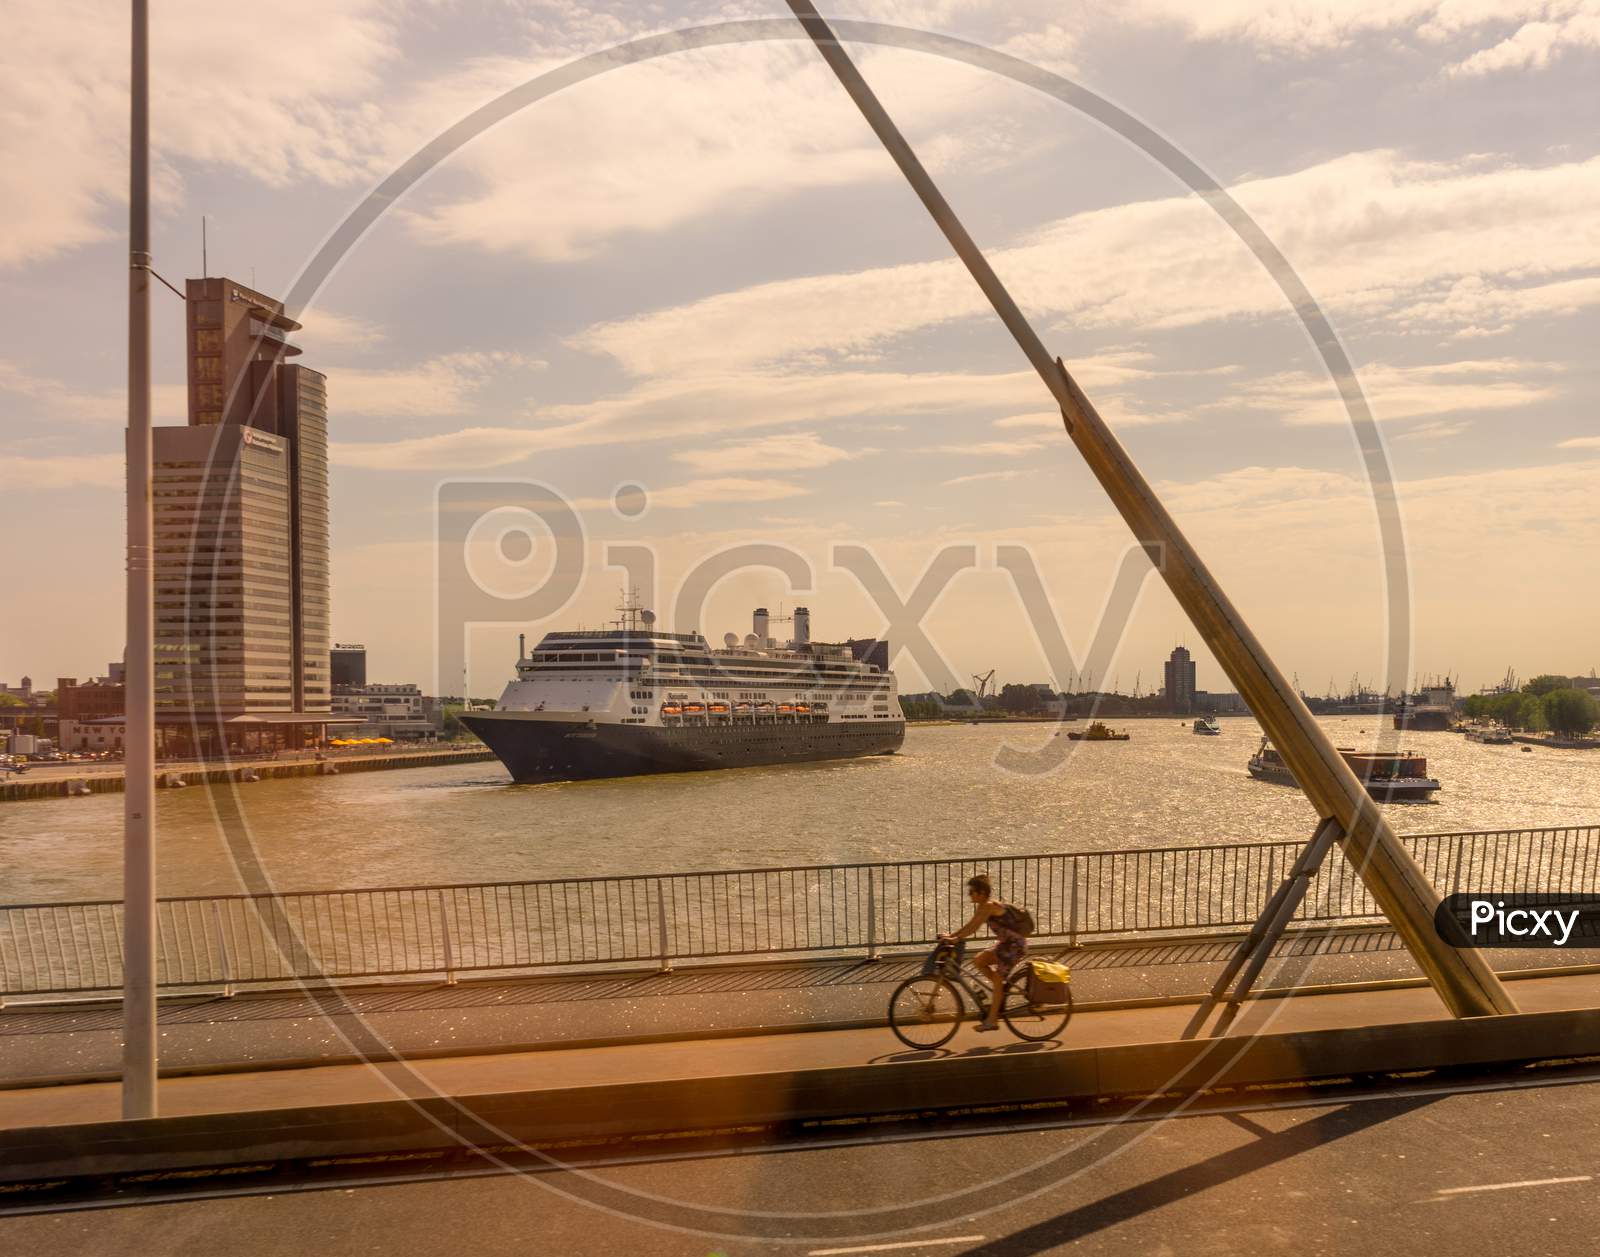 Rotterdam, Netherlands - 27 May: Cyclist On The Erasmus Bridge At Rotterdam With Cruise Ship In Background On 27 May 2017. Rotterdam Is A Major Port City In The Dutch Province Of South Holland